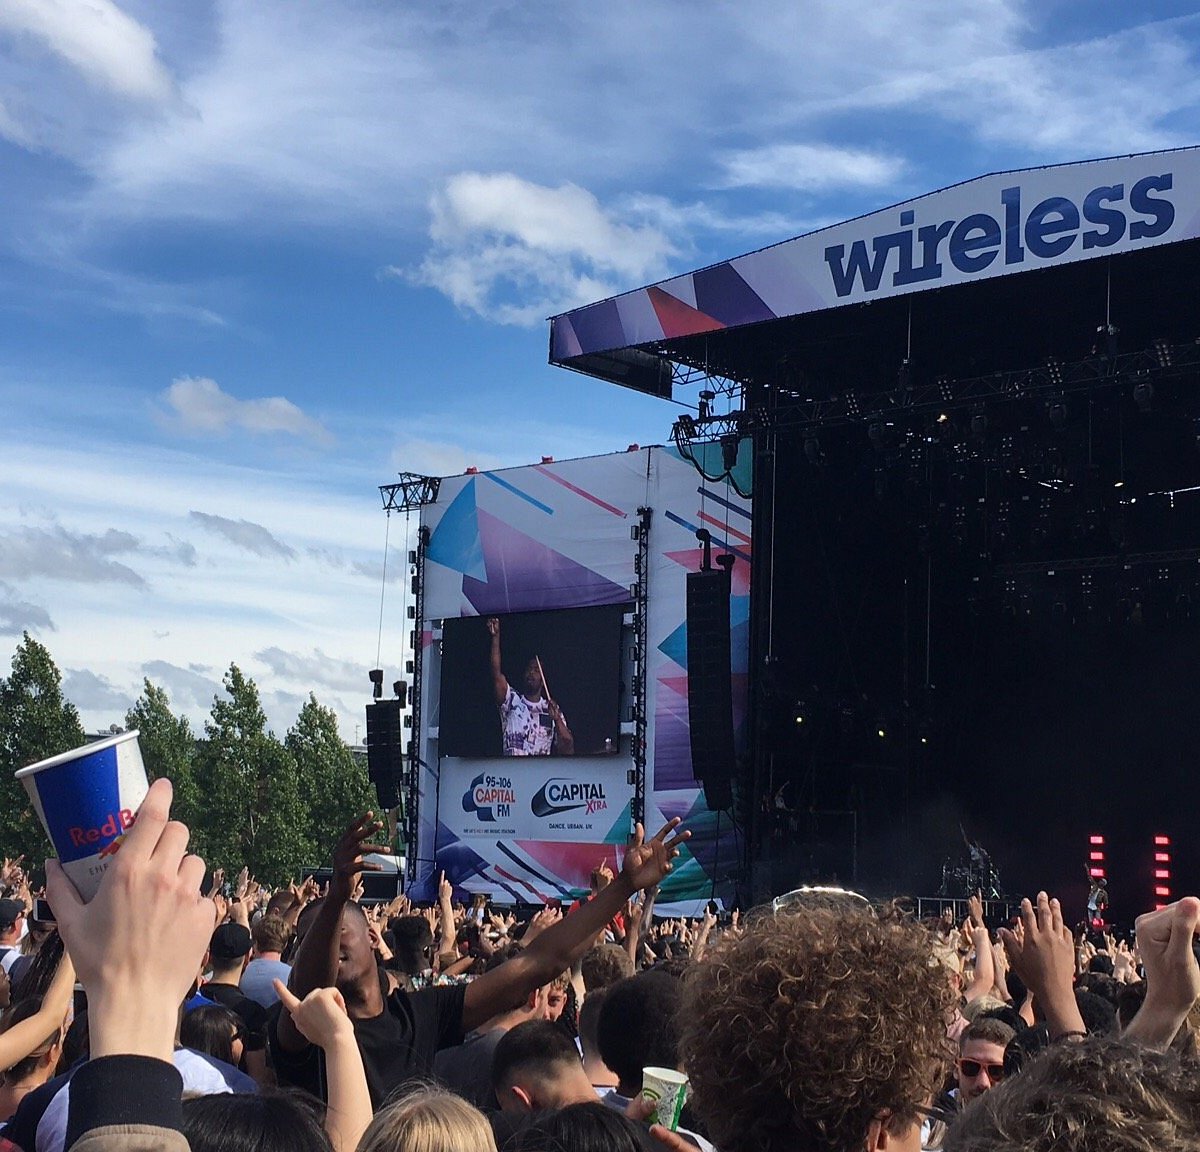 Playboi Carti performs on day 2 of Wireless Festival 2022 at